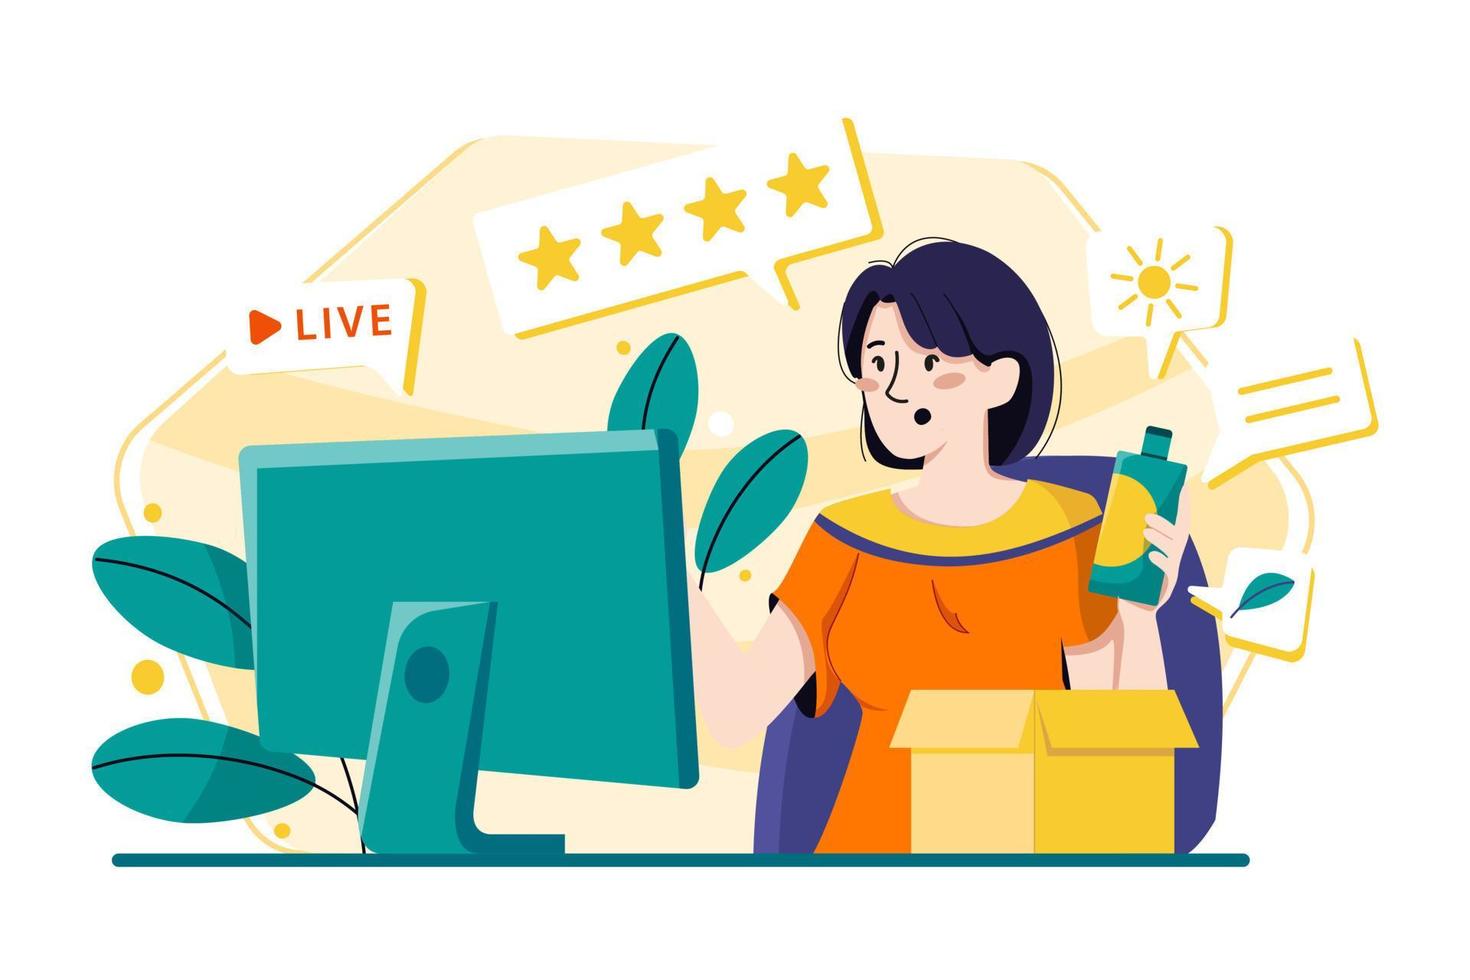 Live product review vector